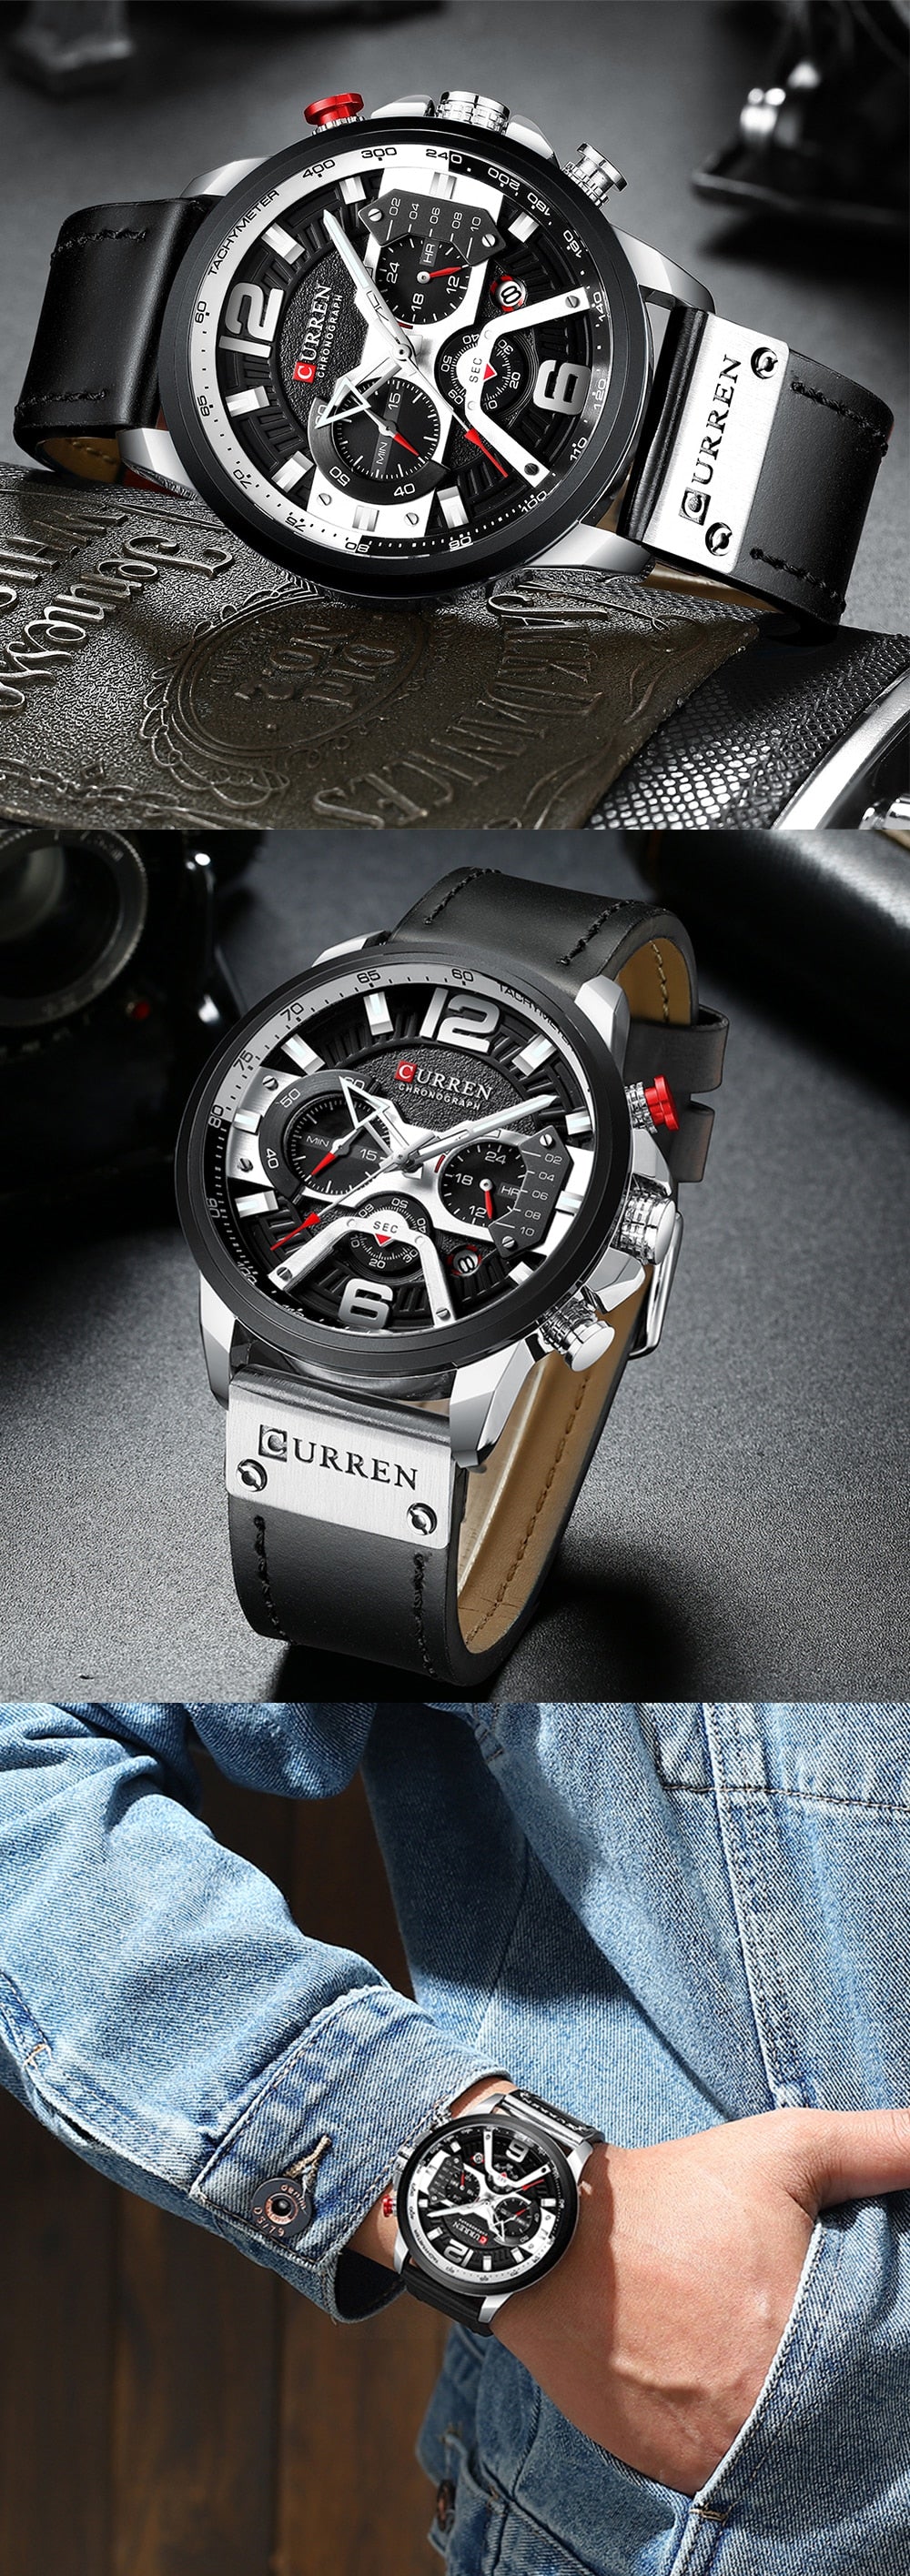 Curren Model 8329 Quartz Sport Chronograph watch available from FiveTo.co.uk